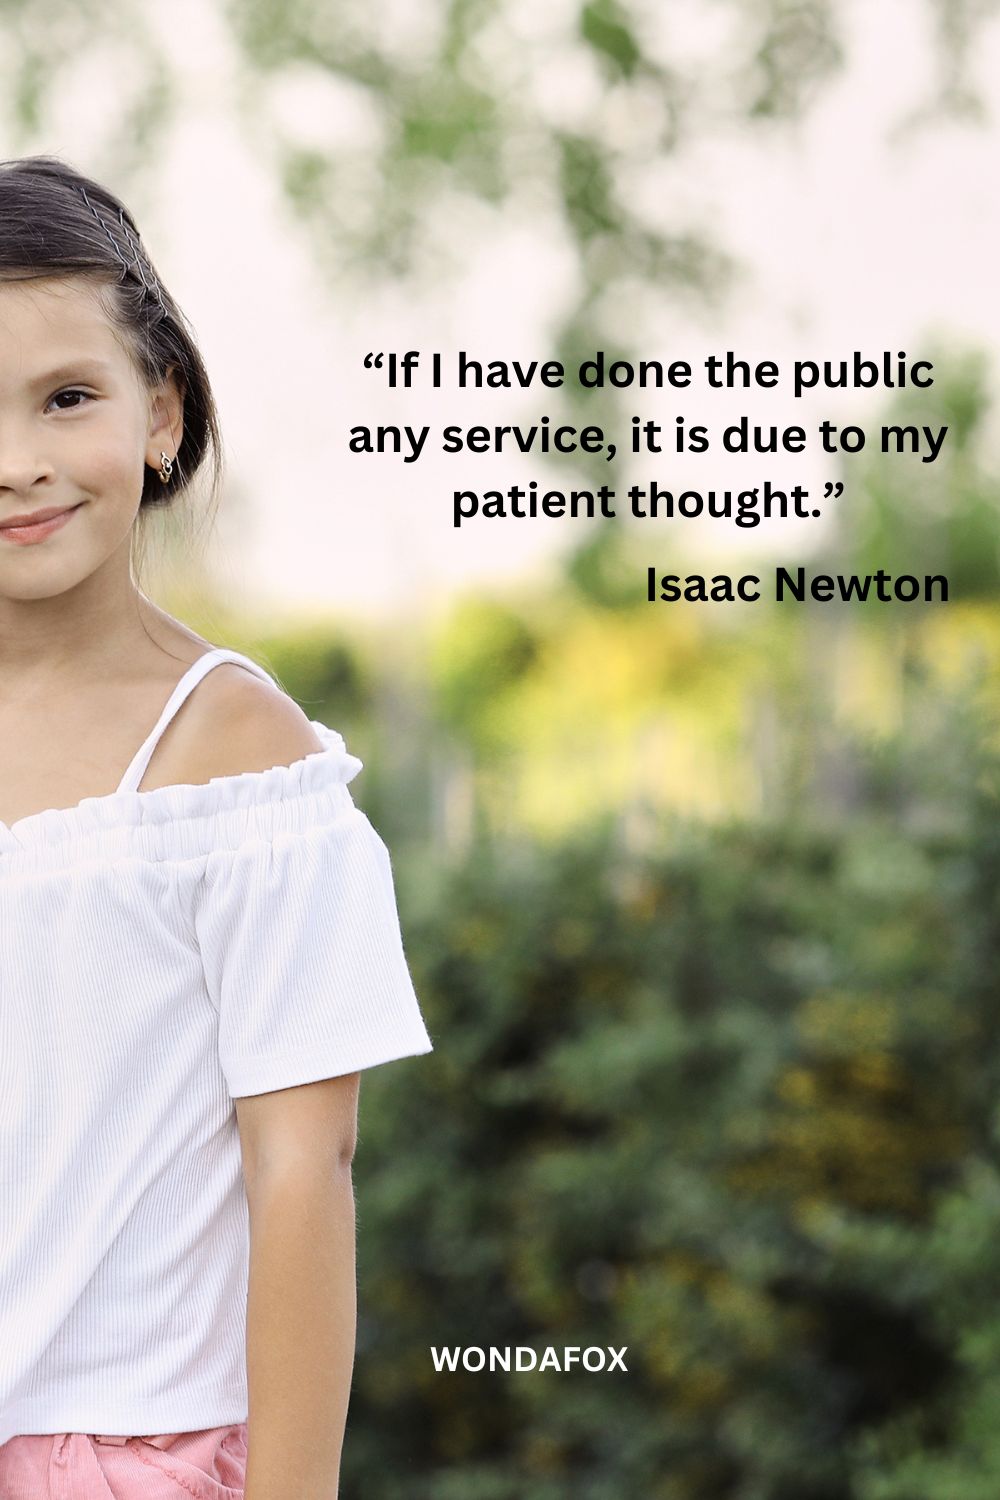 “If I have done the public any service, it is due to my patient thought.”
Isaac Newton